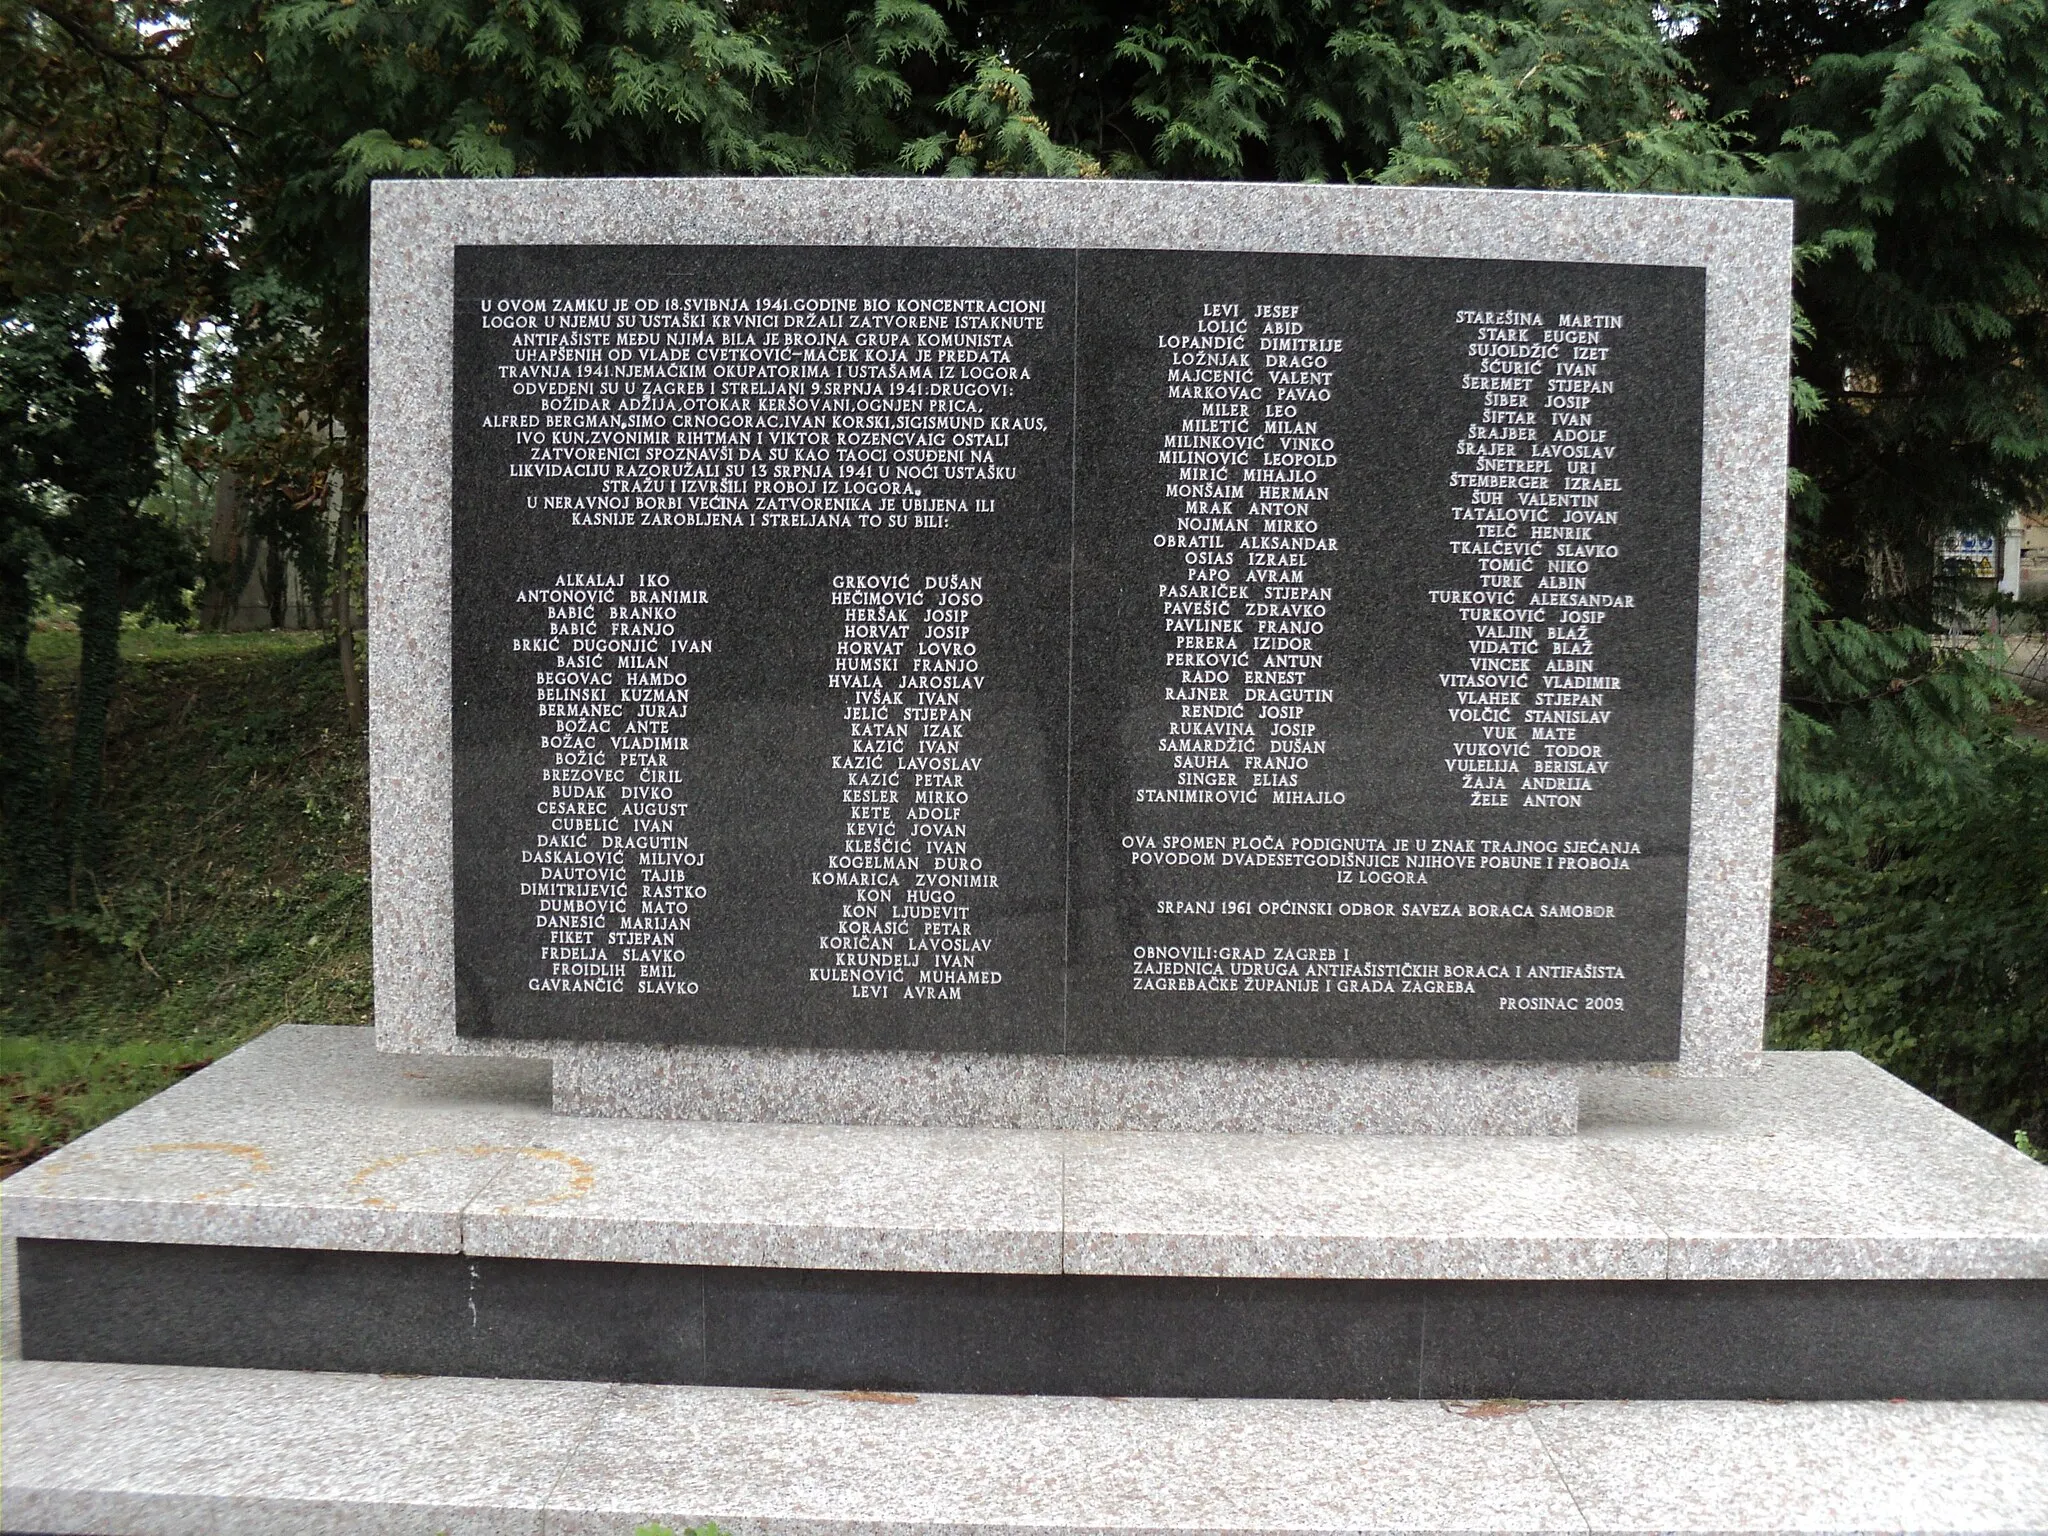 Photo showing: Memorial of the Kerestinec camp victims of fascism, killed by Ustasha in 1941